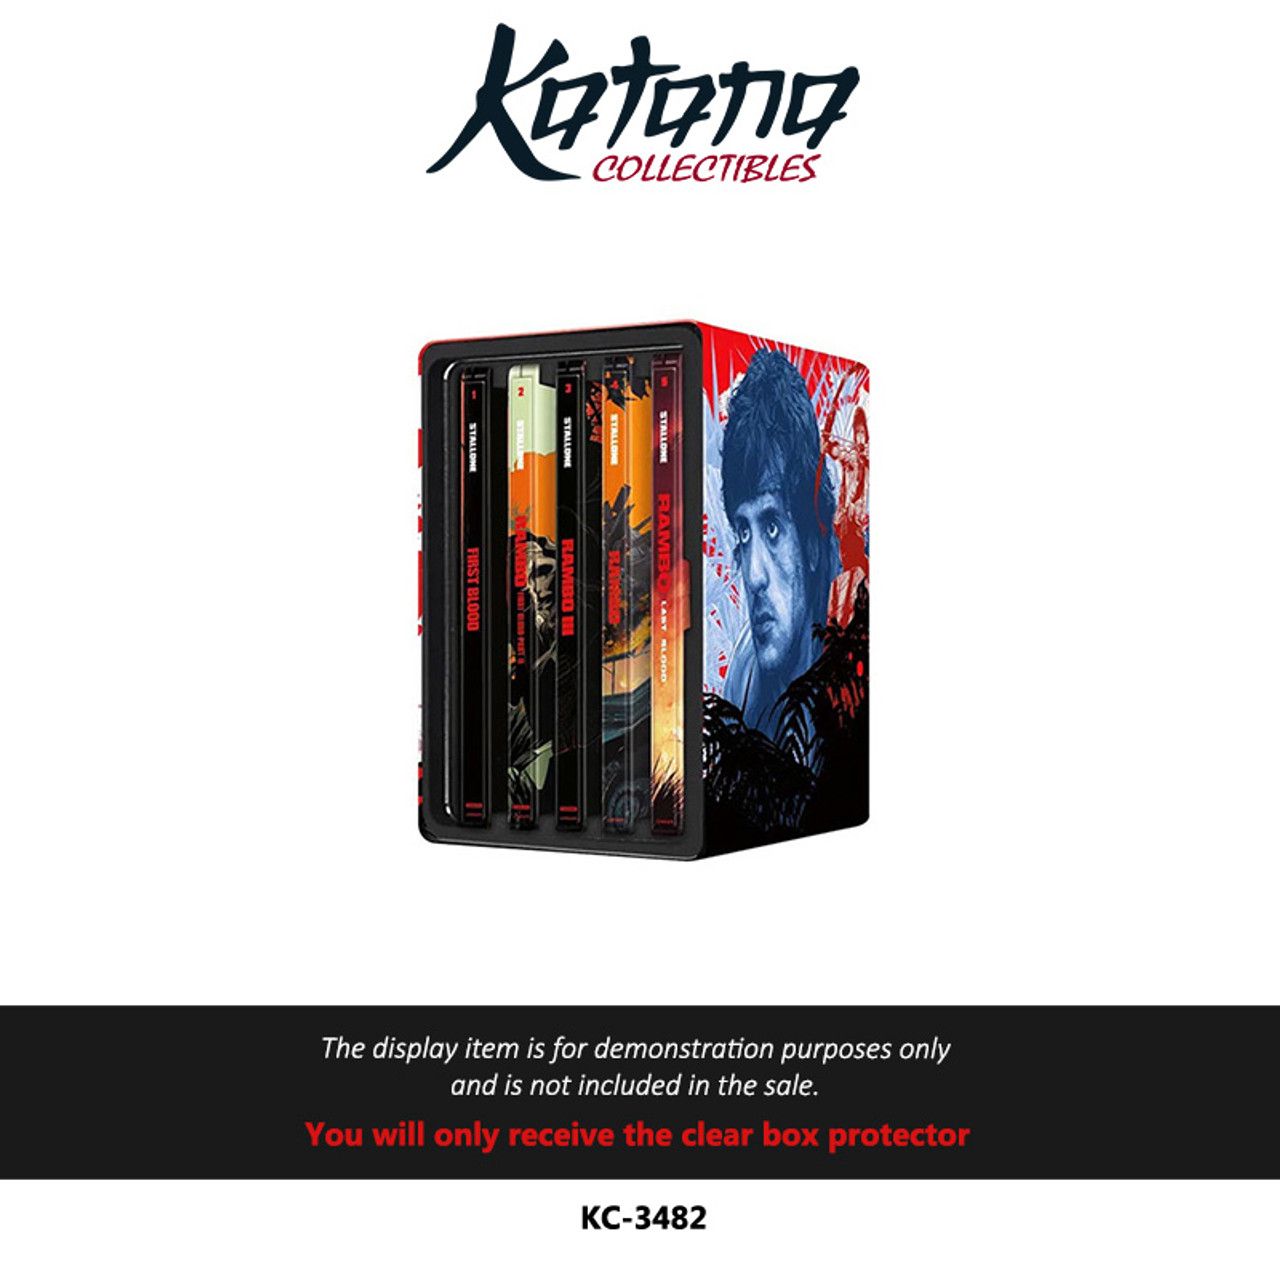 Katana Collectibles Protector For Rambo The Complete Steelbook Collection